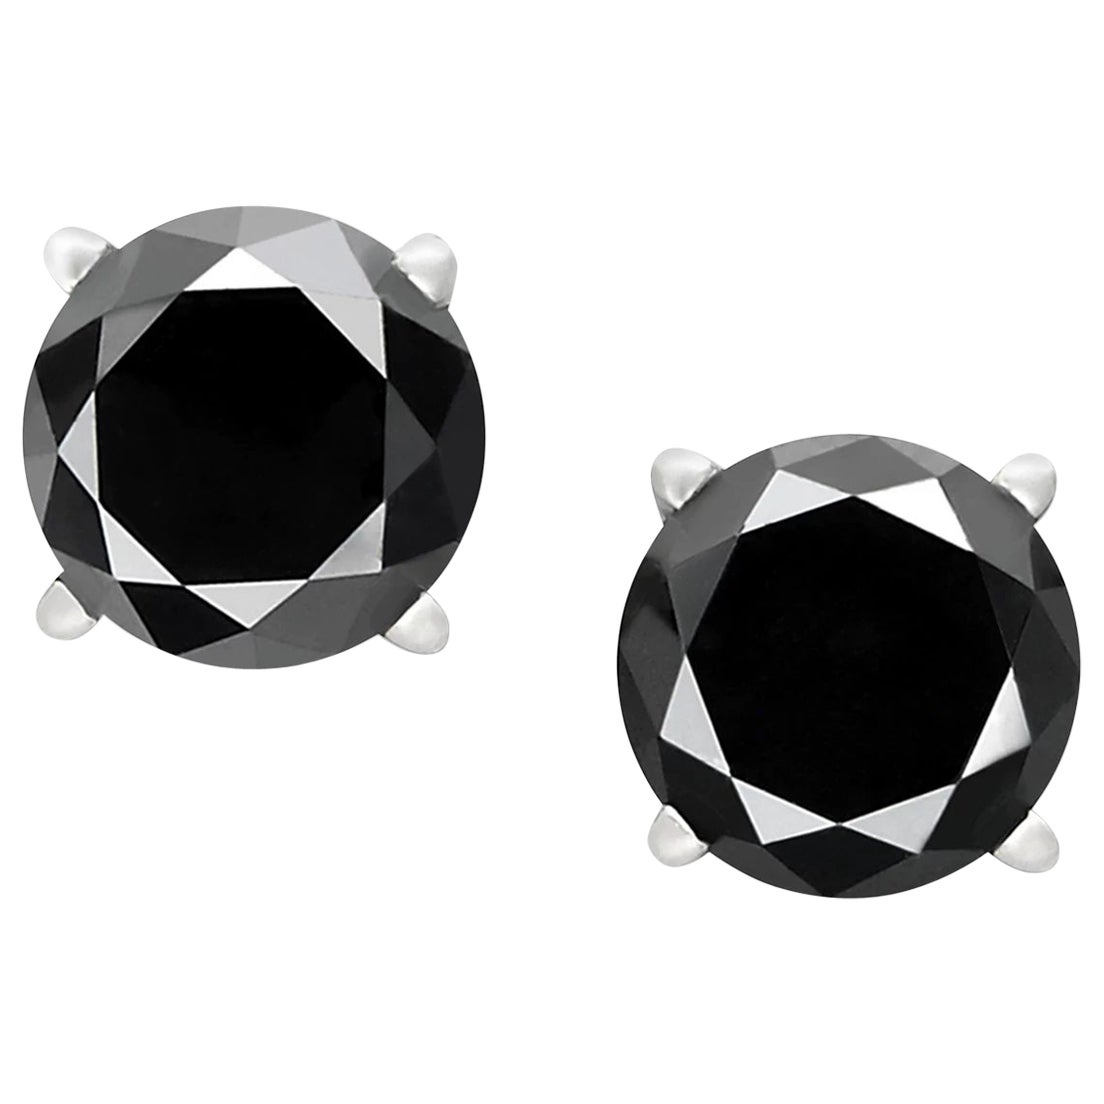 3.84 Carat Total Round Black Diamond Solitaire Stud Earrings in 14 K White Gold